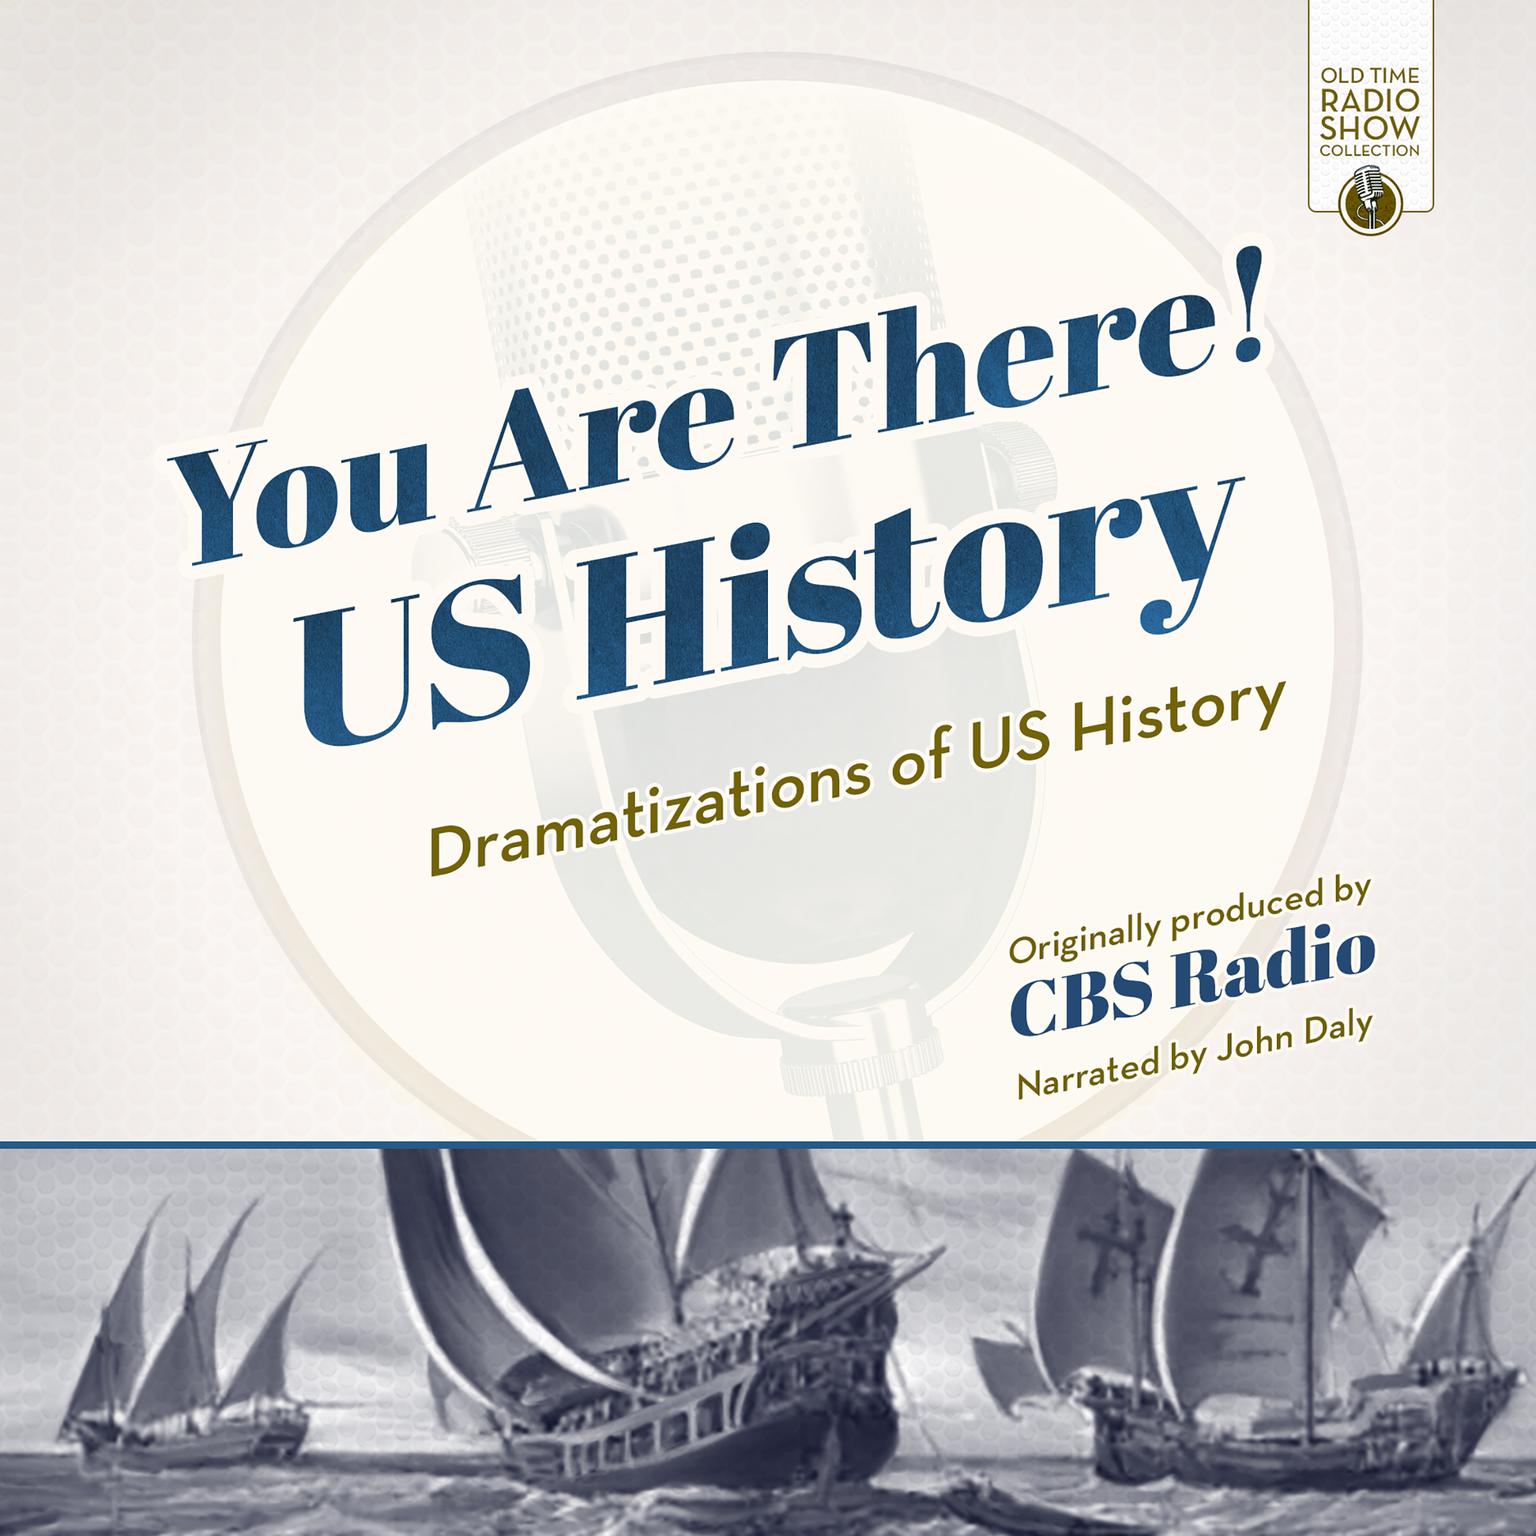 You Are There! US History: Dramatizations of US History Audiobook, by CBS Radio